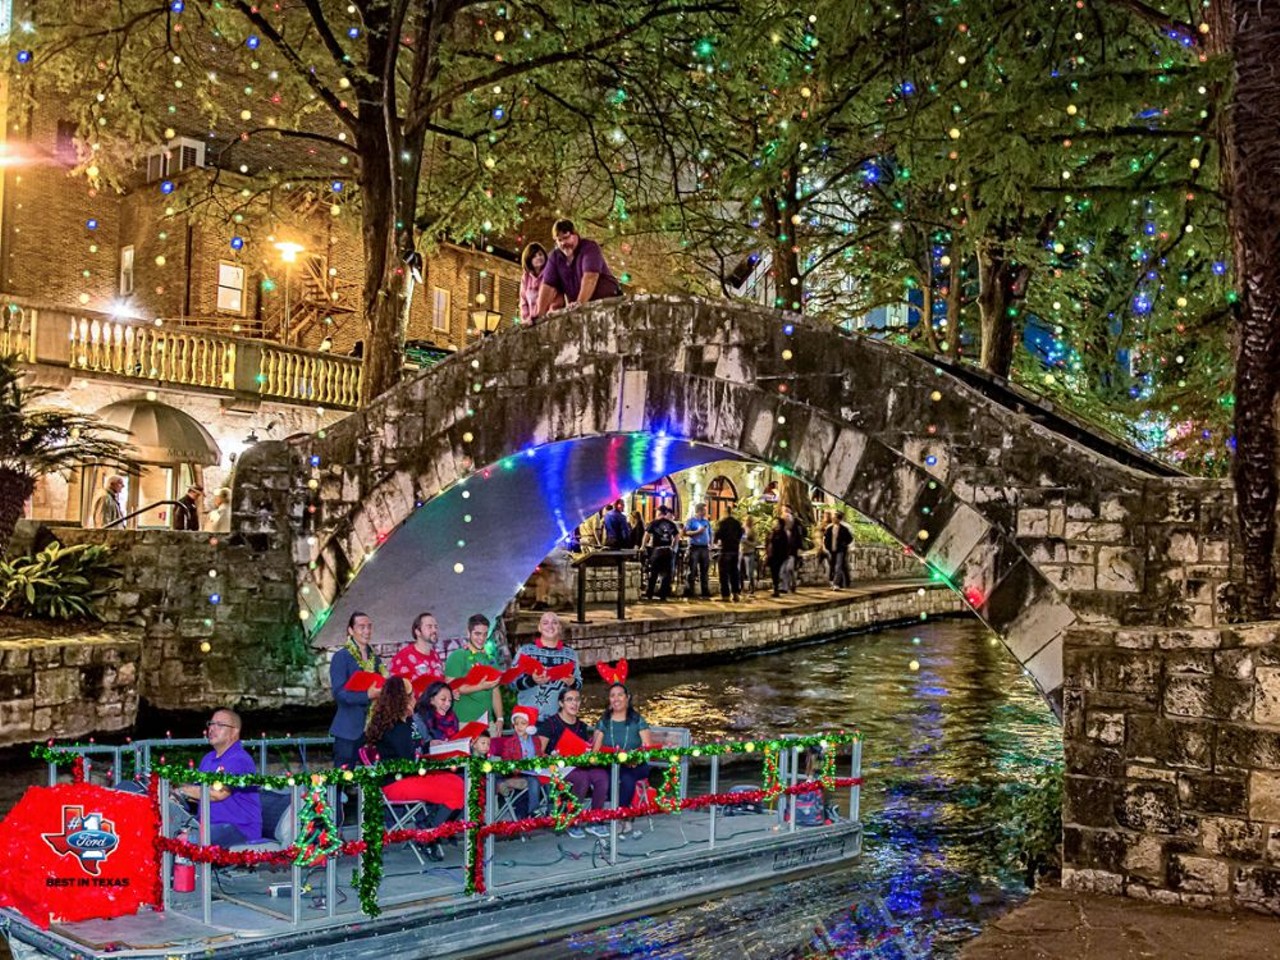 Carol in style on the San Antonio River
Forget going door-to-door— from Nov. 30-Dec. 23, carolers can hop on a river barge and spread the holiday spirit on the San Antonio River Walk. Reservations can be made on an individual basis, or for an entire boat.